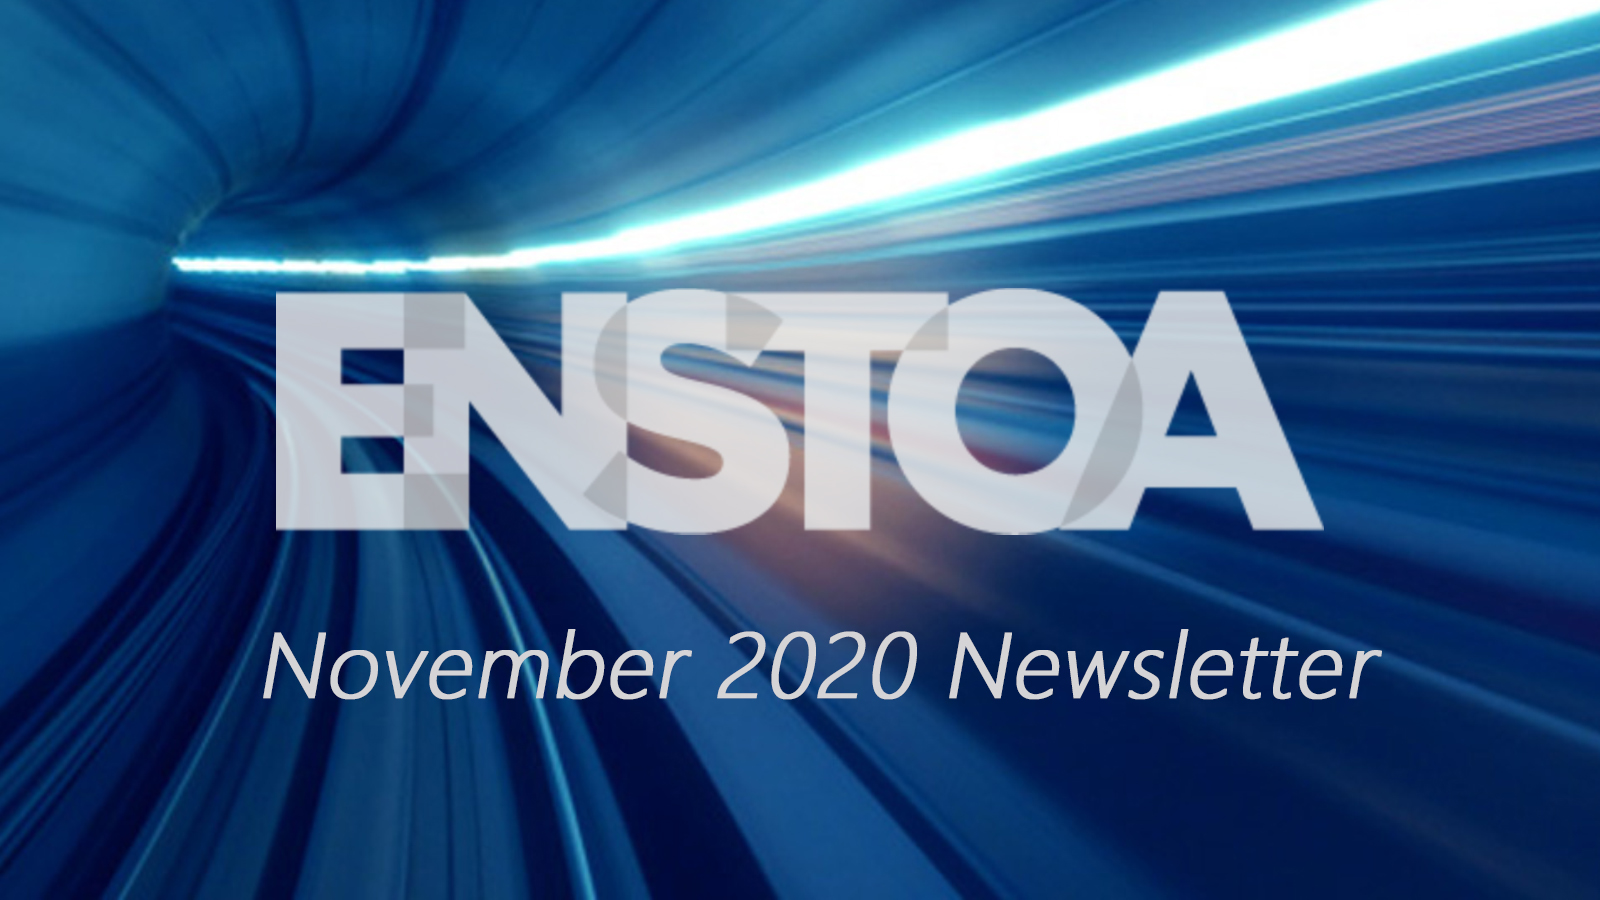 November 2020 Newsletter: Digital transformation without the multi-million-dollar price tag